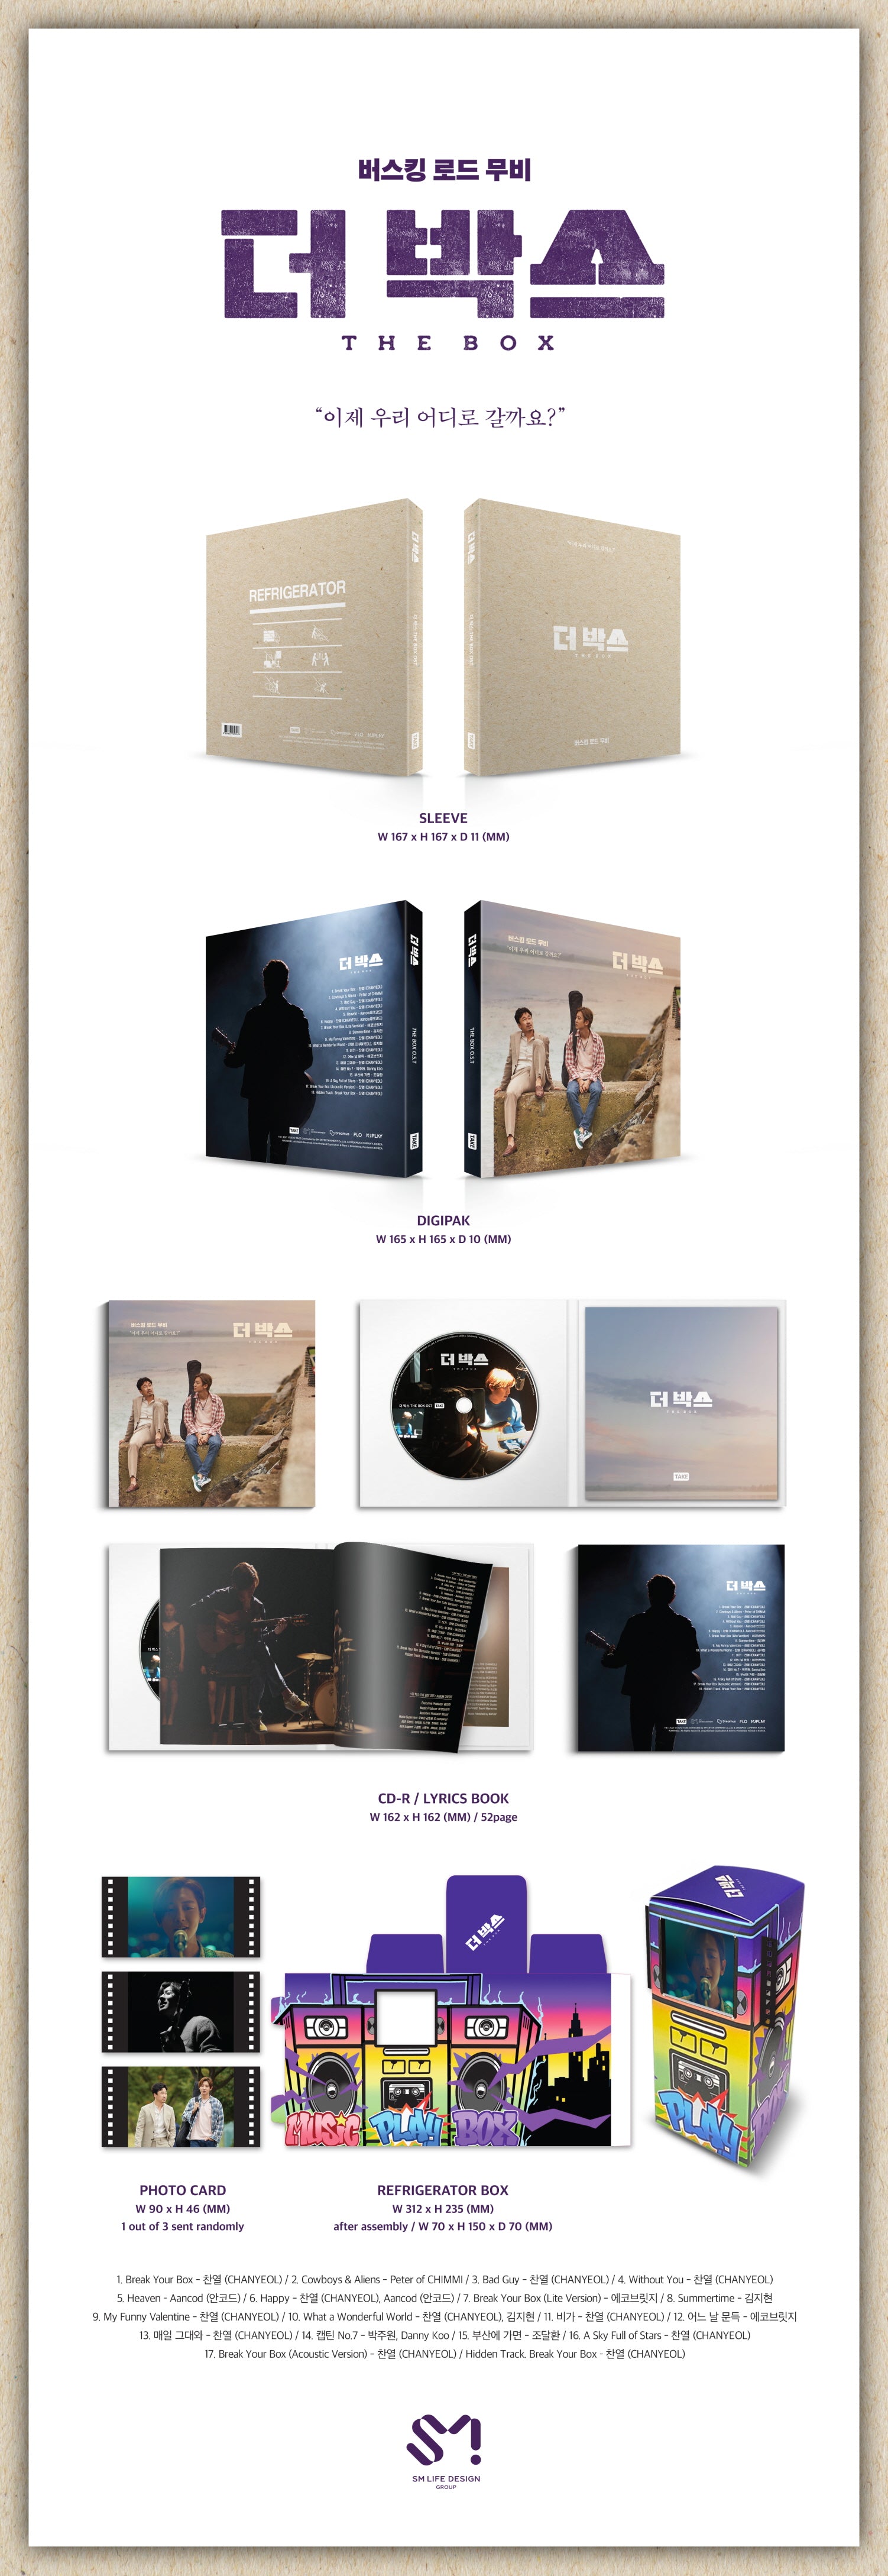 1 CD
1 Lyrics Book (52 pages)
1 Photo Card (random out of 3 types)
1 Refrigerator Box